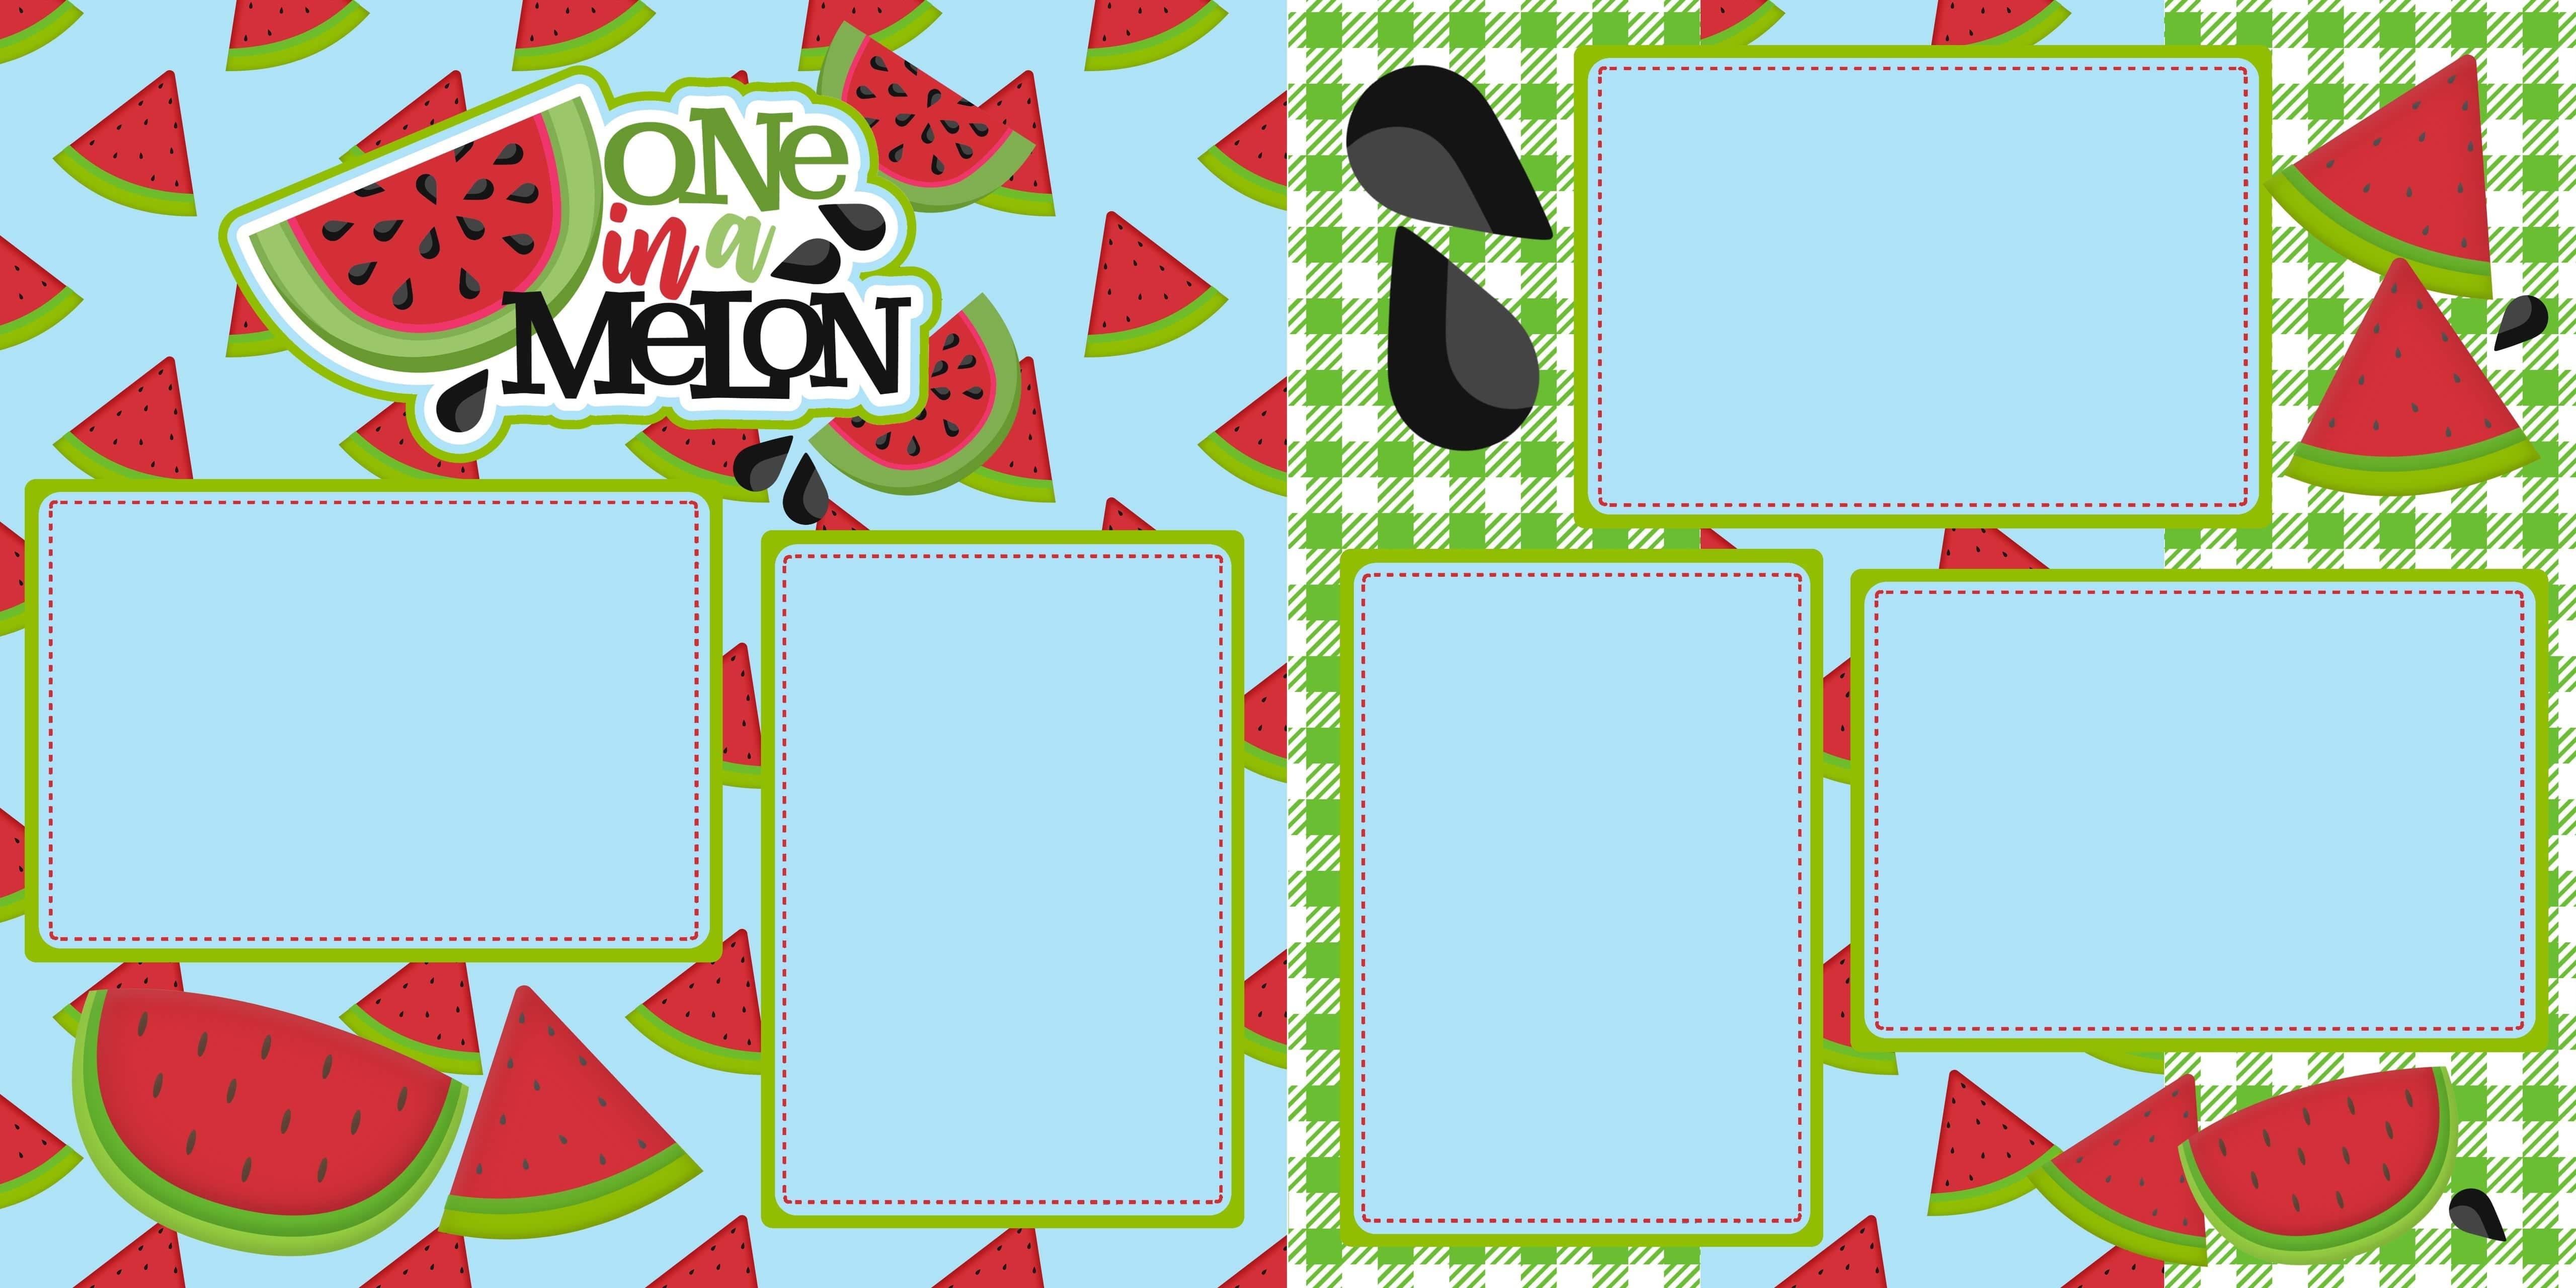 One In A Melon Punny (2) - 12 x 12 Premade, Printed Scrapbook Pages by SSC Designs